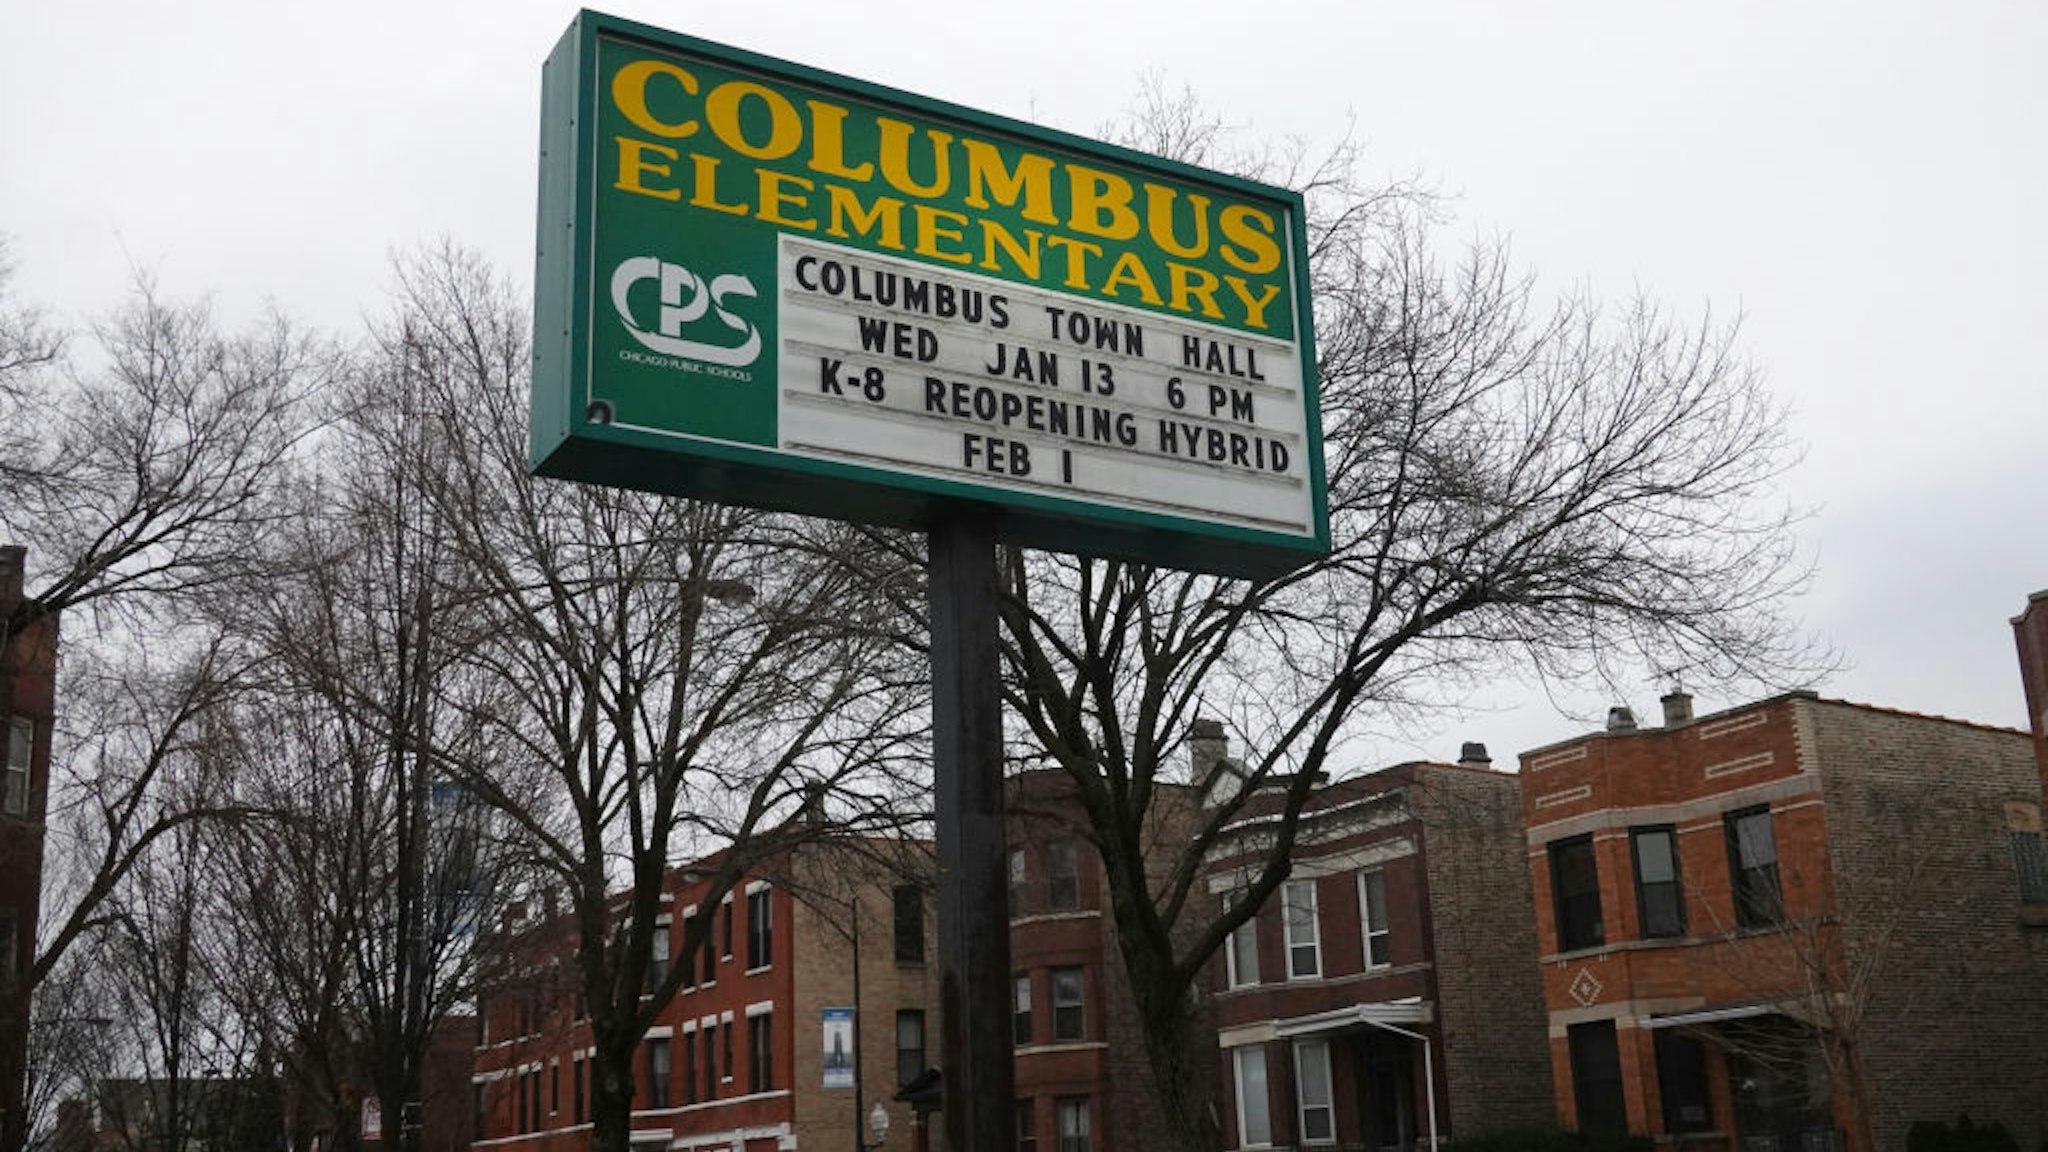 A sign outside of Columbus Elementary School delivers messages to students and parents on January 25, 2021 in Chicago, Illinois. Chicago Public School teachers were scheduled to return to the classroom for in-person learning today, but the union objected and voted to continue remote learning